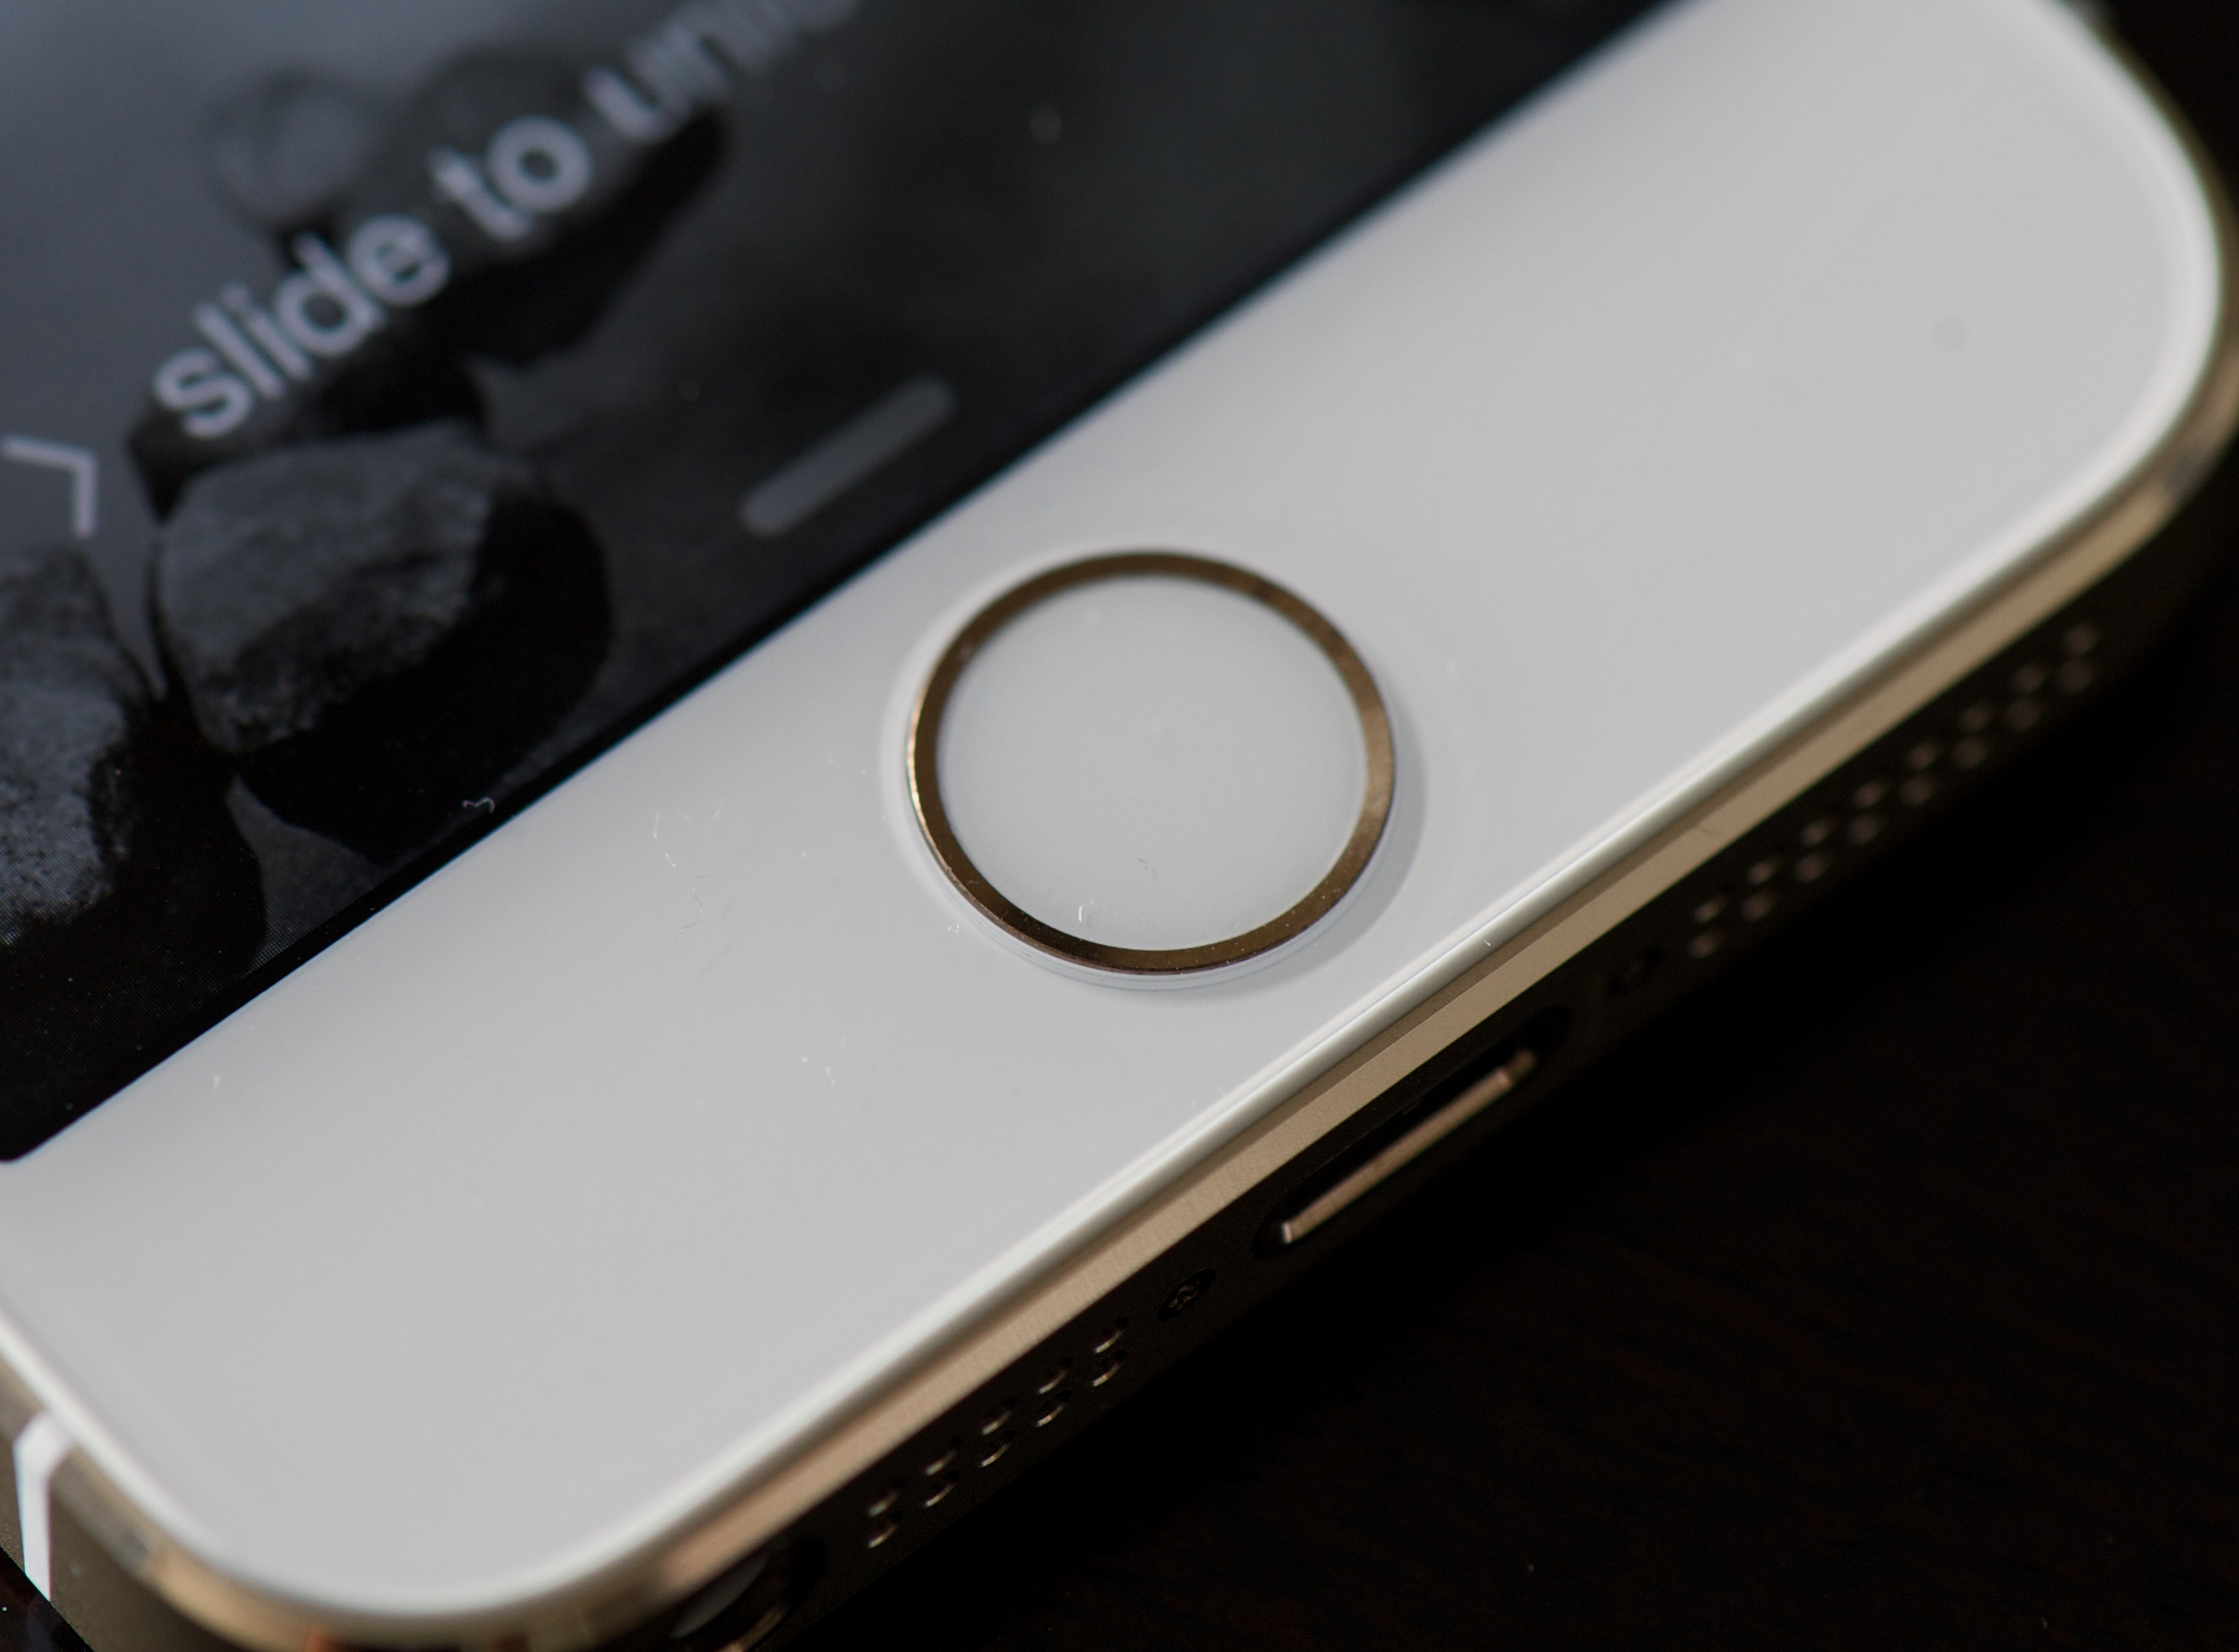 IOS 7.1.1 delivers a big improvement to Touch ID on the iPhone 5s.